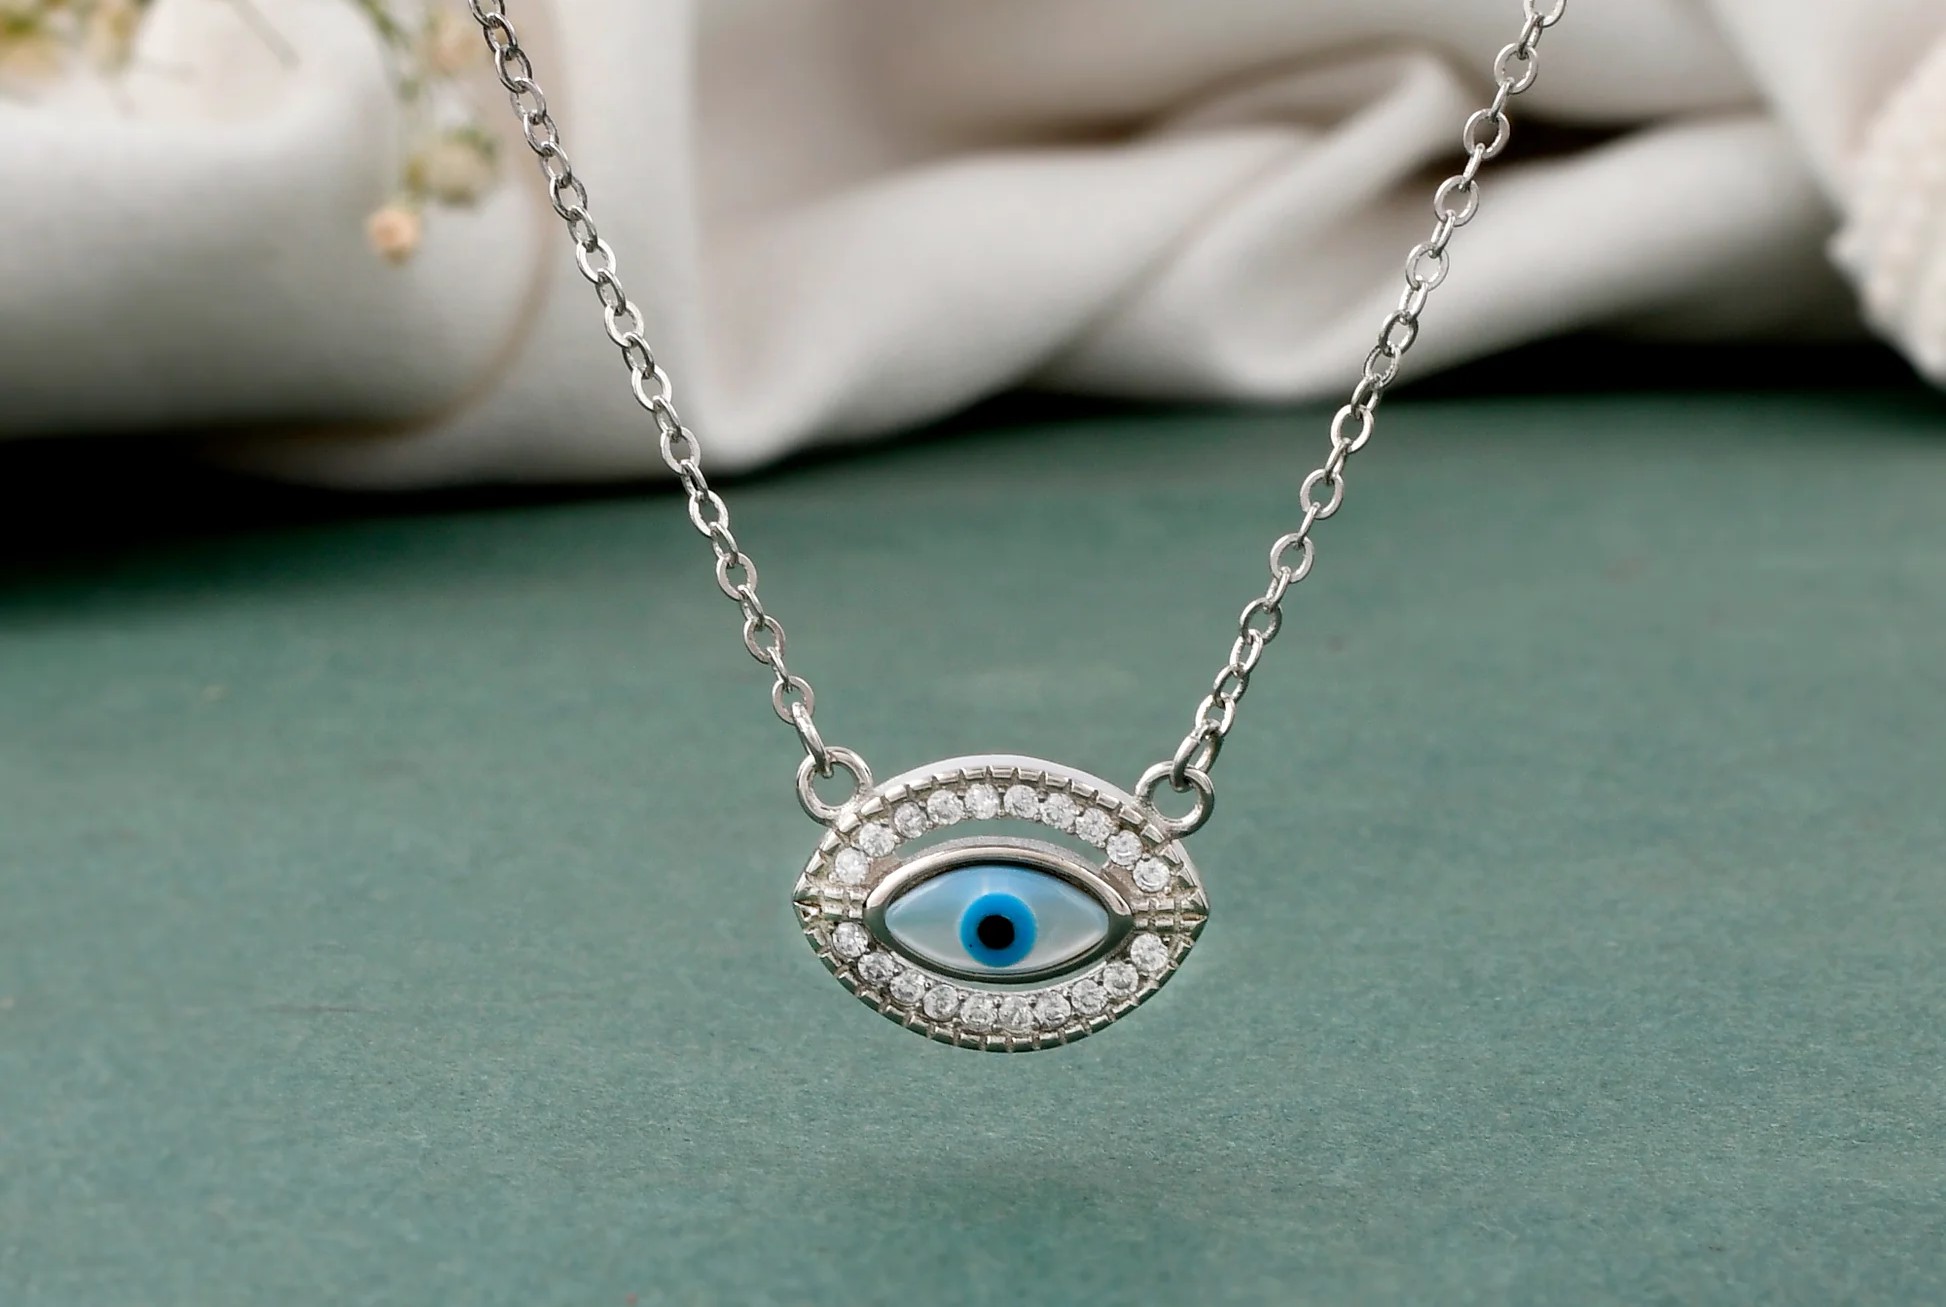 The Shocking Truth: Wearing An Evil Eye Necklace Brings Unbelievable Bad Luck!